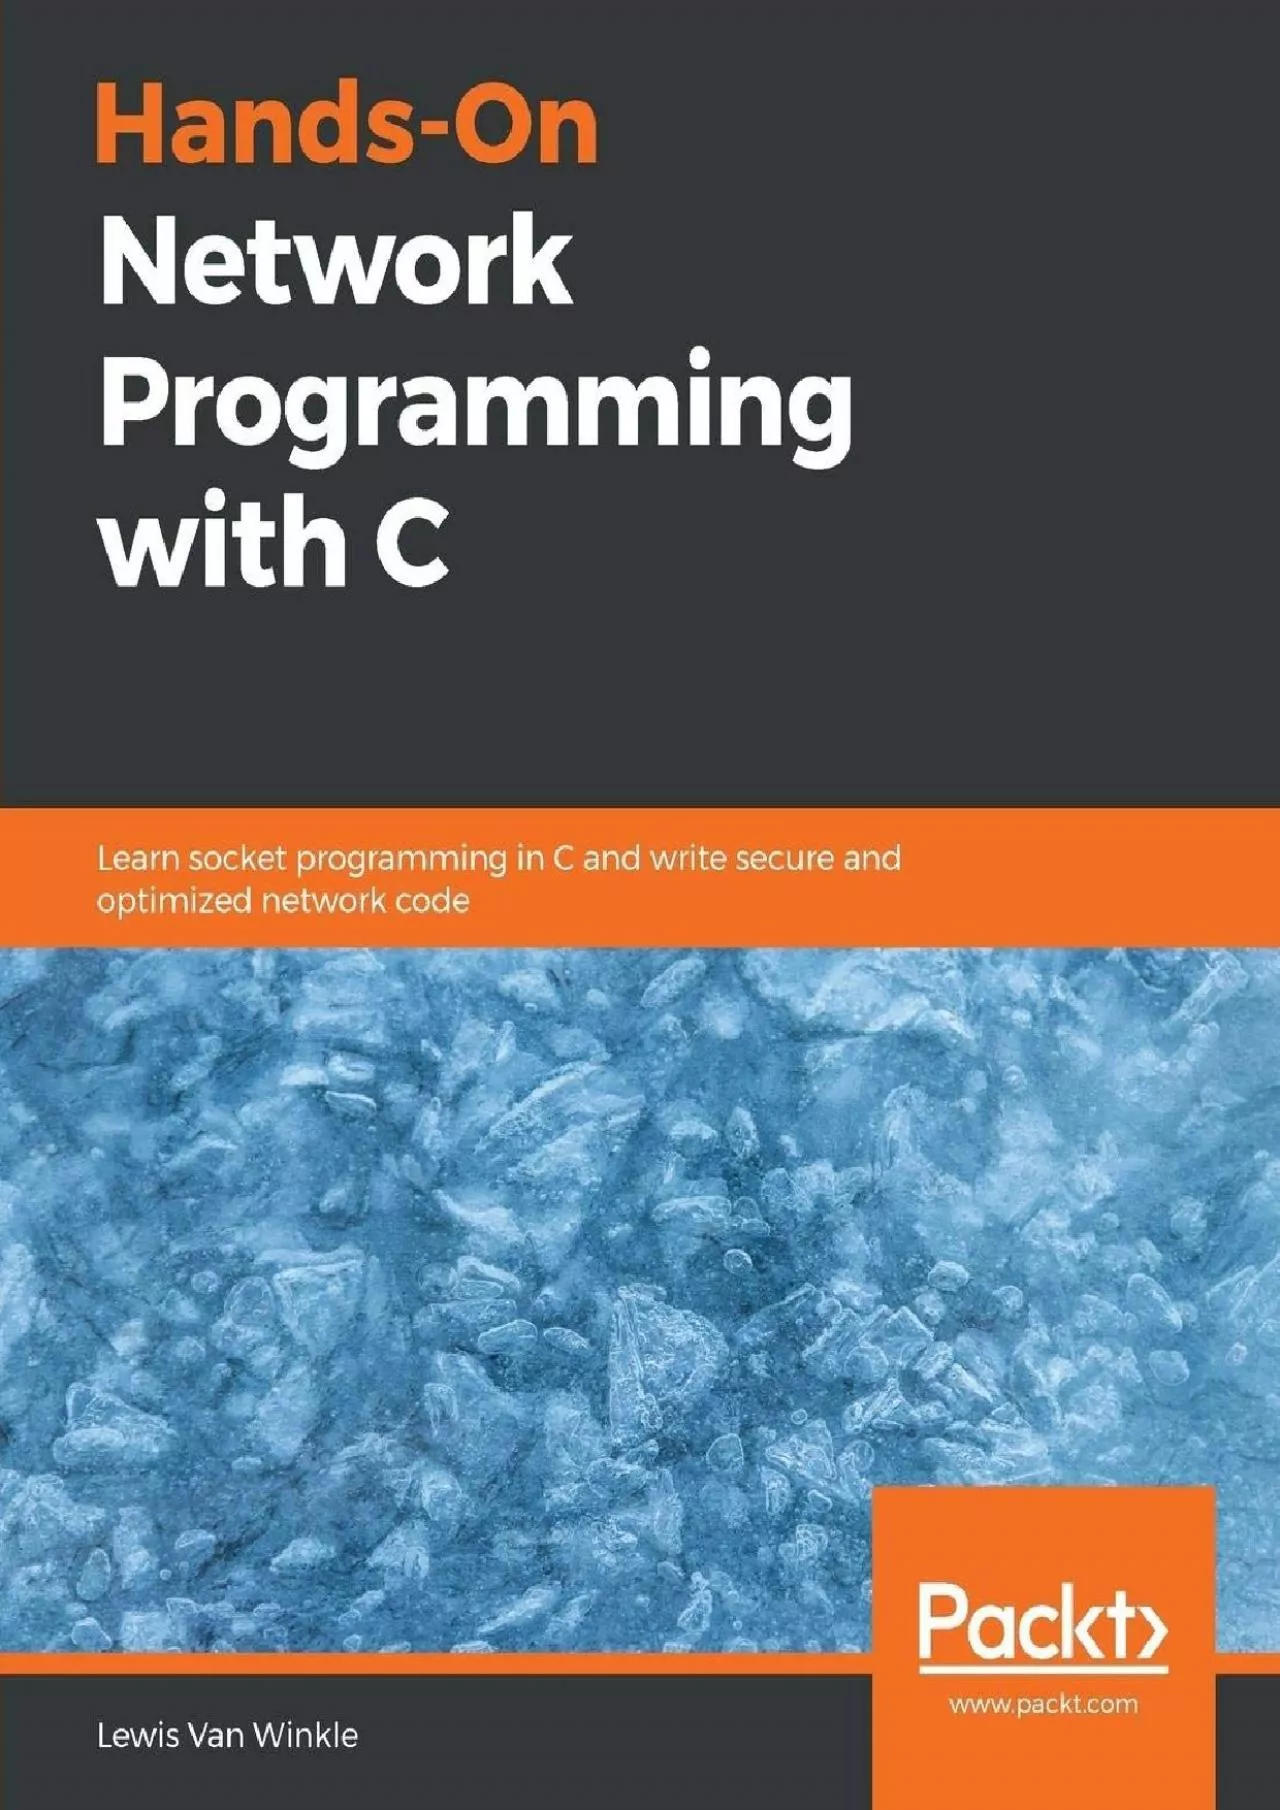 [READ]-Hands-On Network Programming with C: Learn socket programming in C and write secure